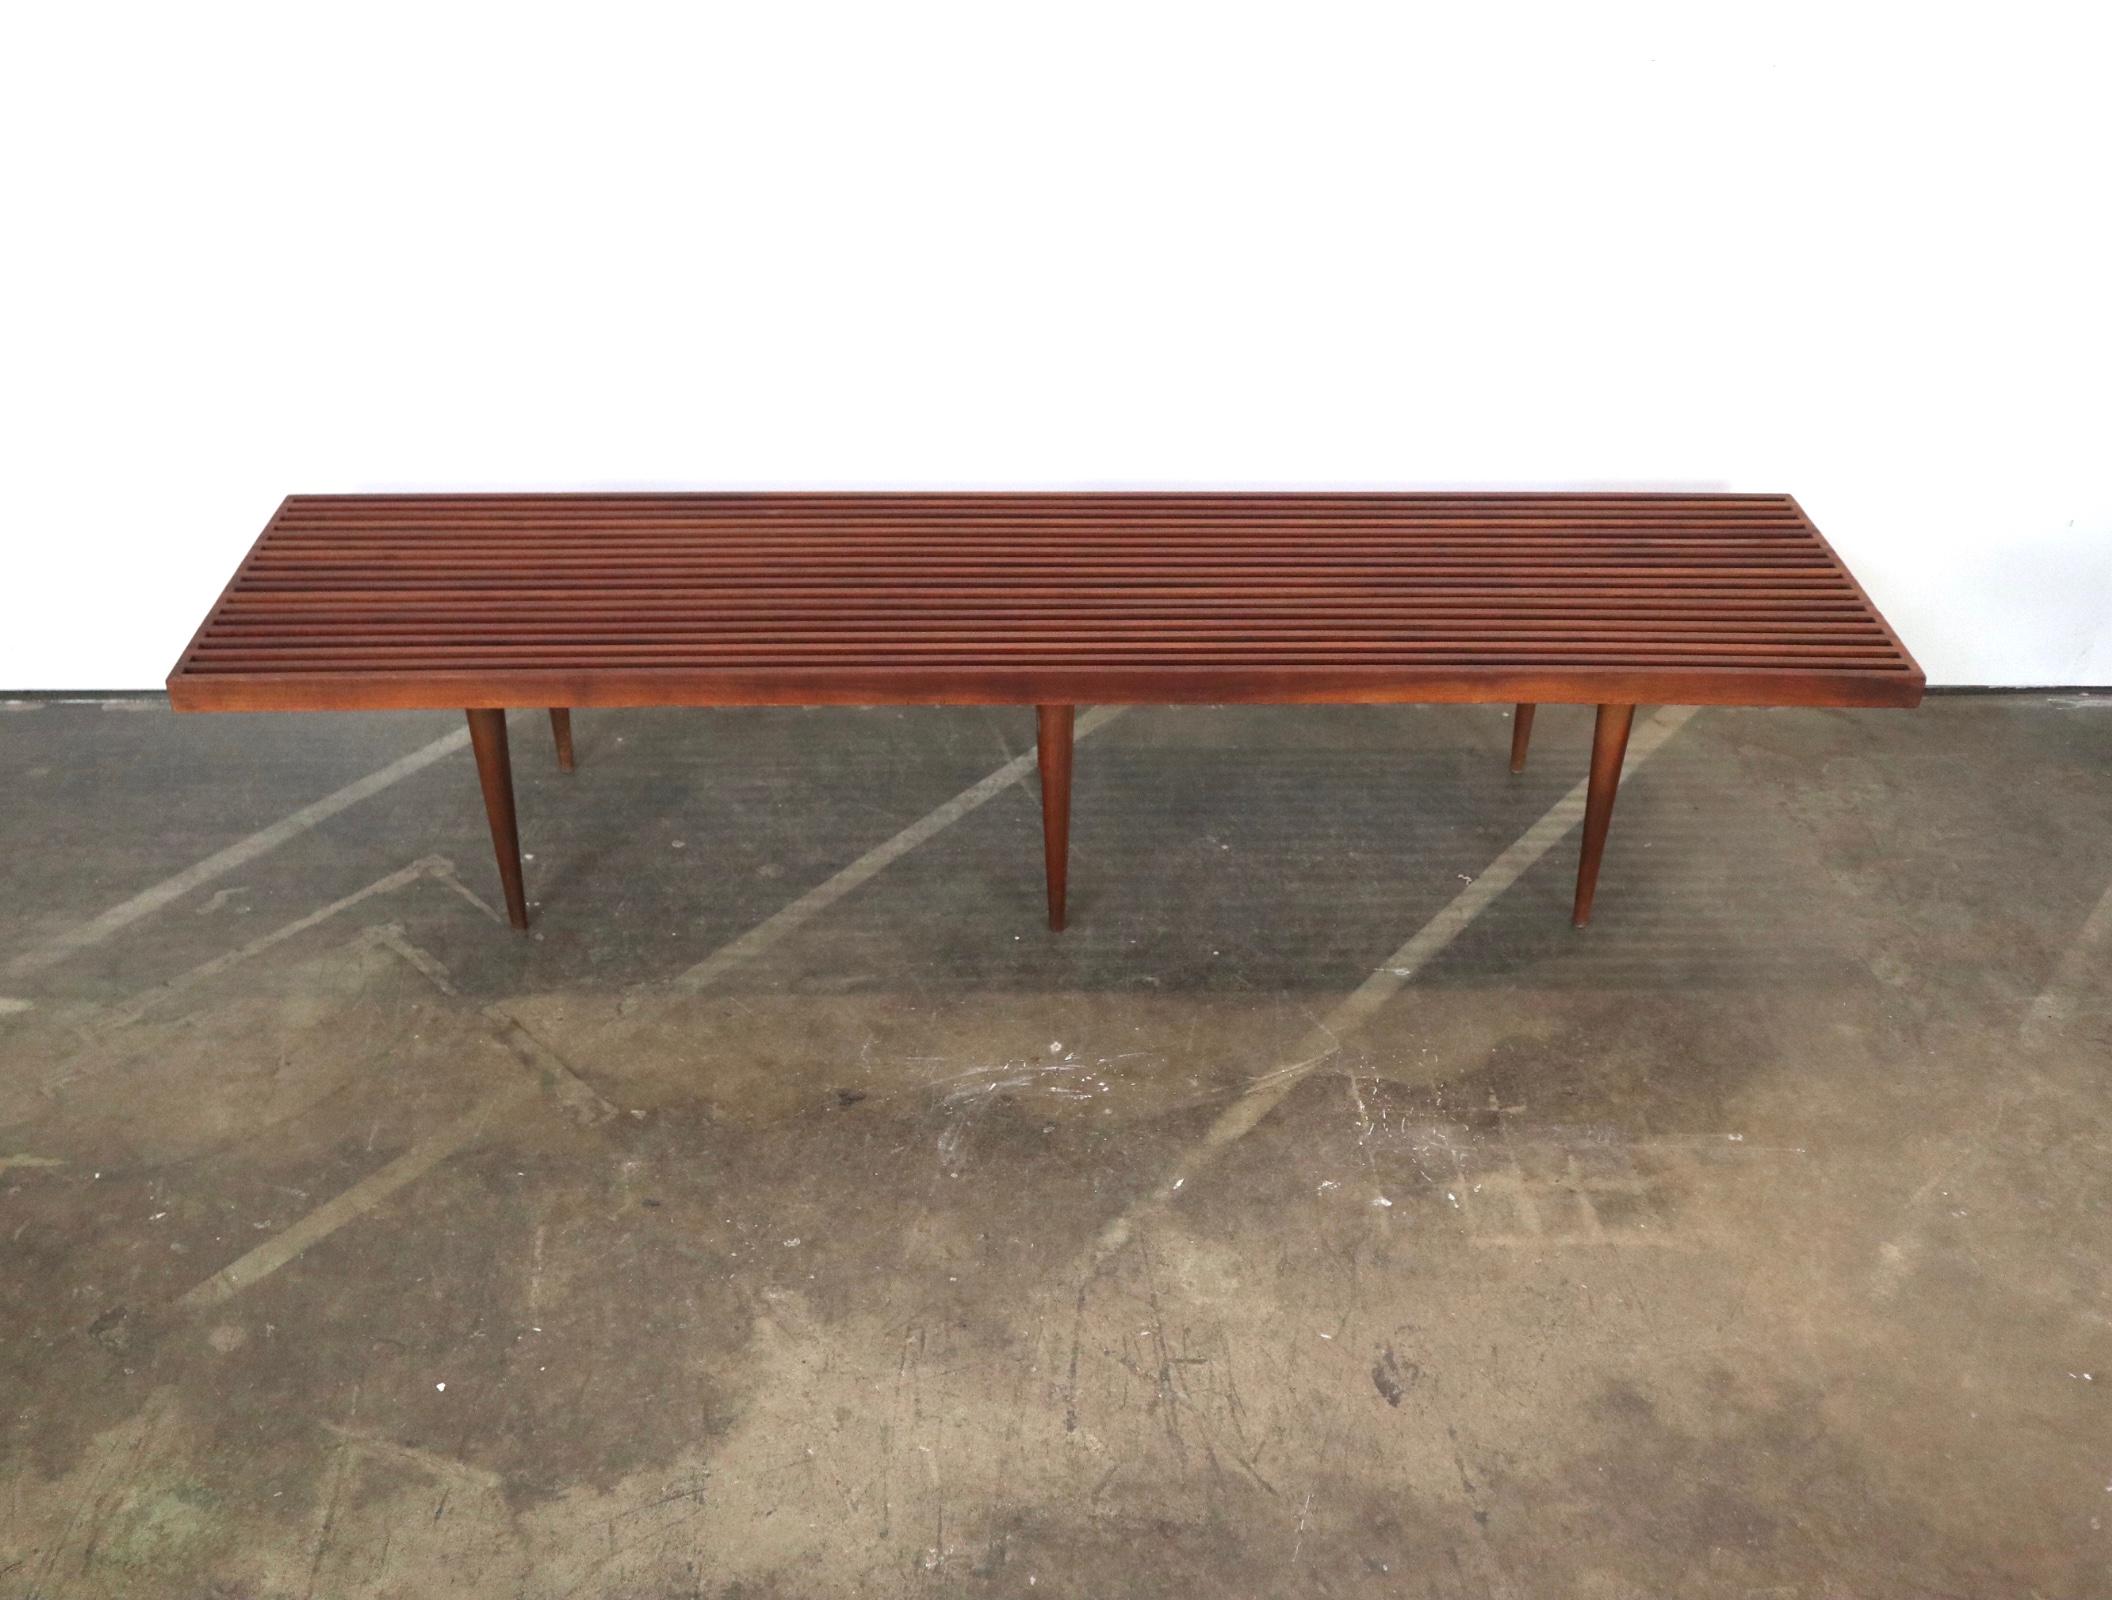 Beautiful Mel Smilow slat bench in walnut. Beautifully executed atop sculpturally tapered legs. In great condition. Legs unscrew for easy shipment or storage. Rager 6 foot length.